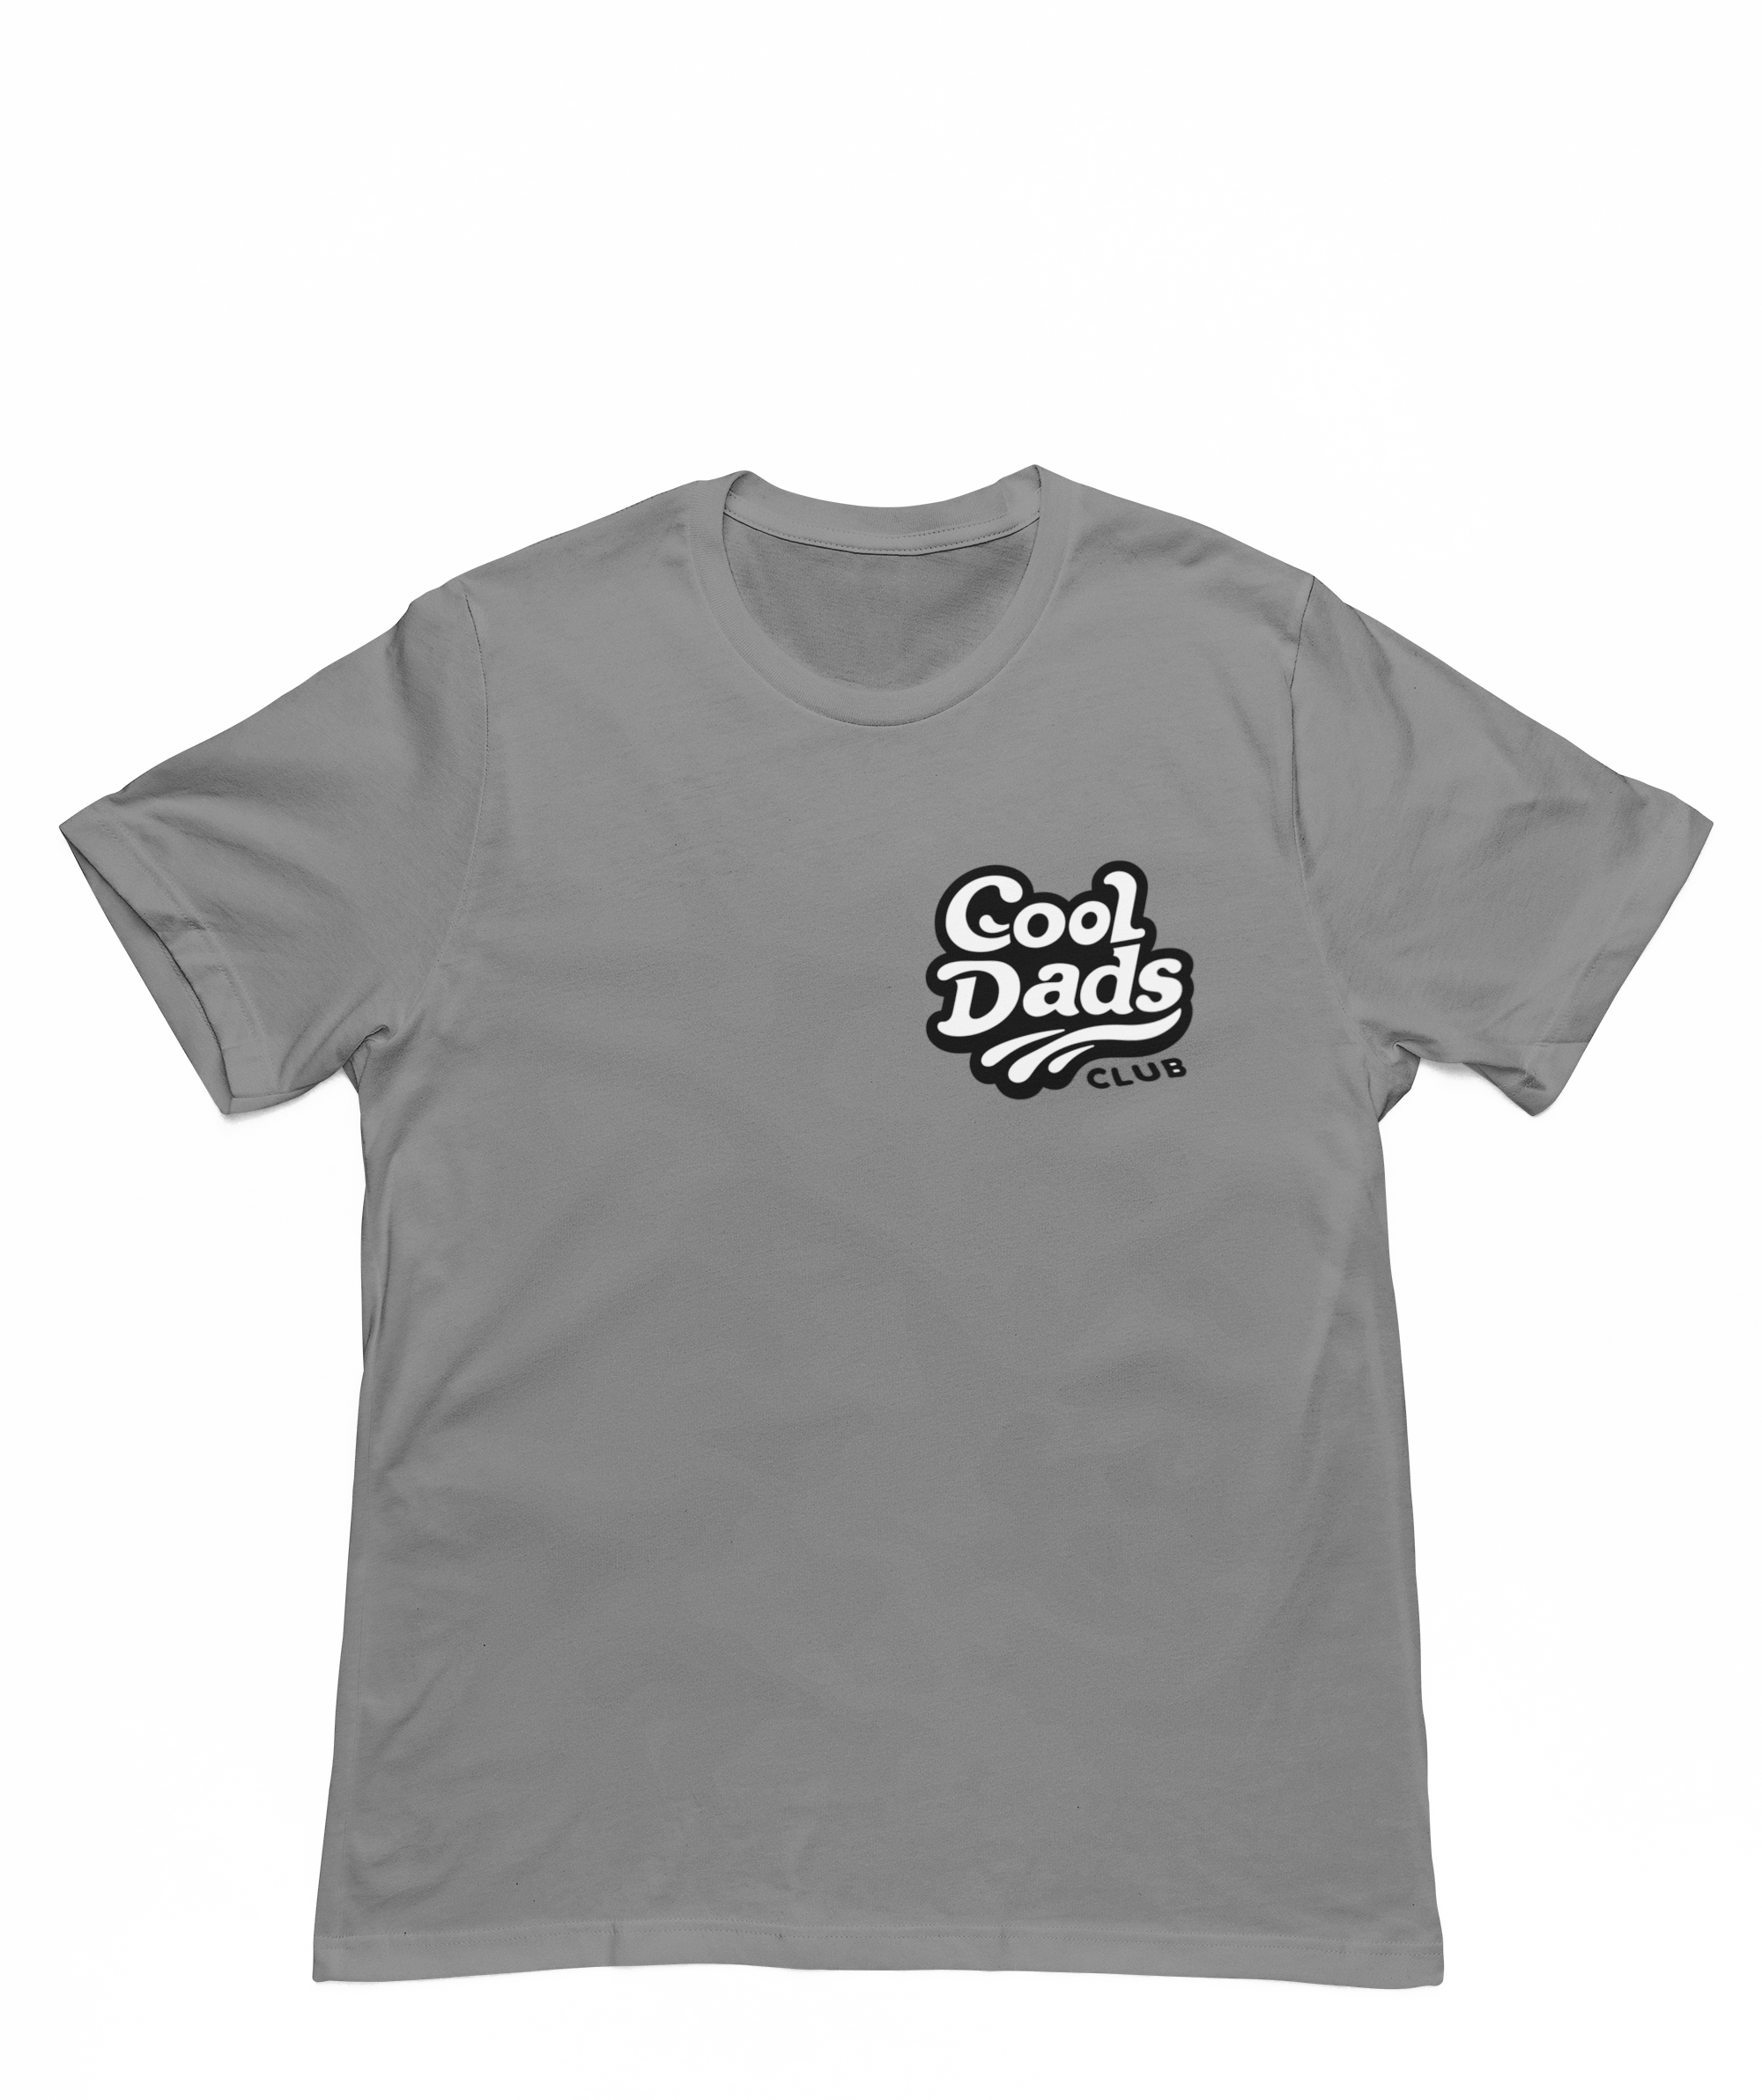 Cool dad t-shirt - Father's Day gift